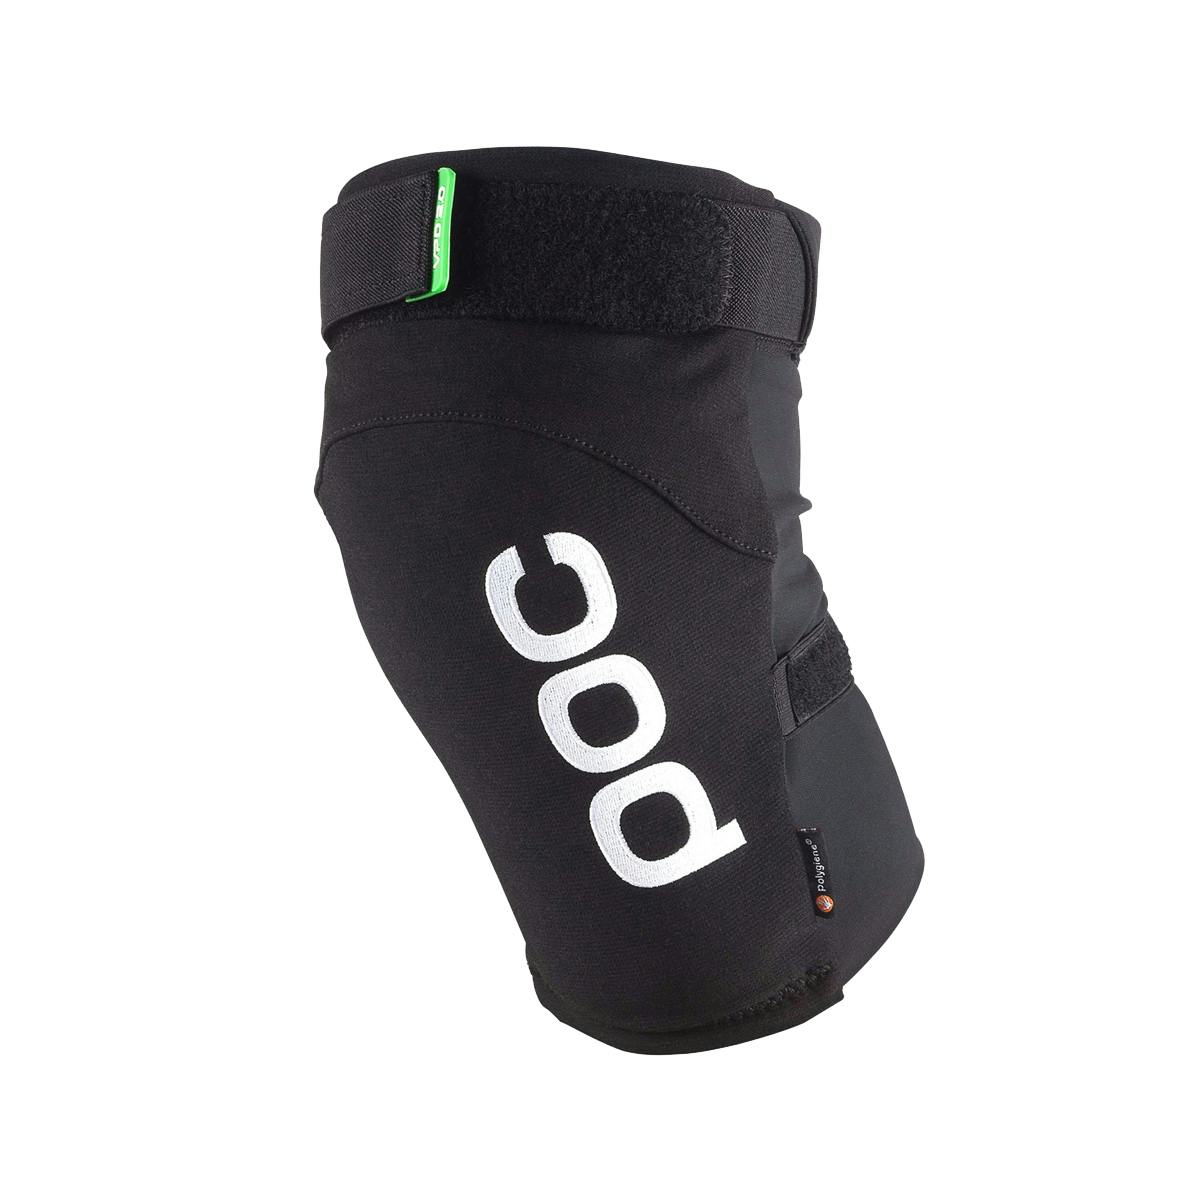 POC Joint VPD 2.0 Knee Pads